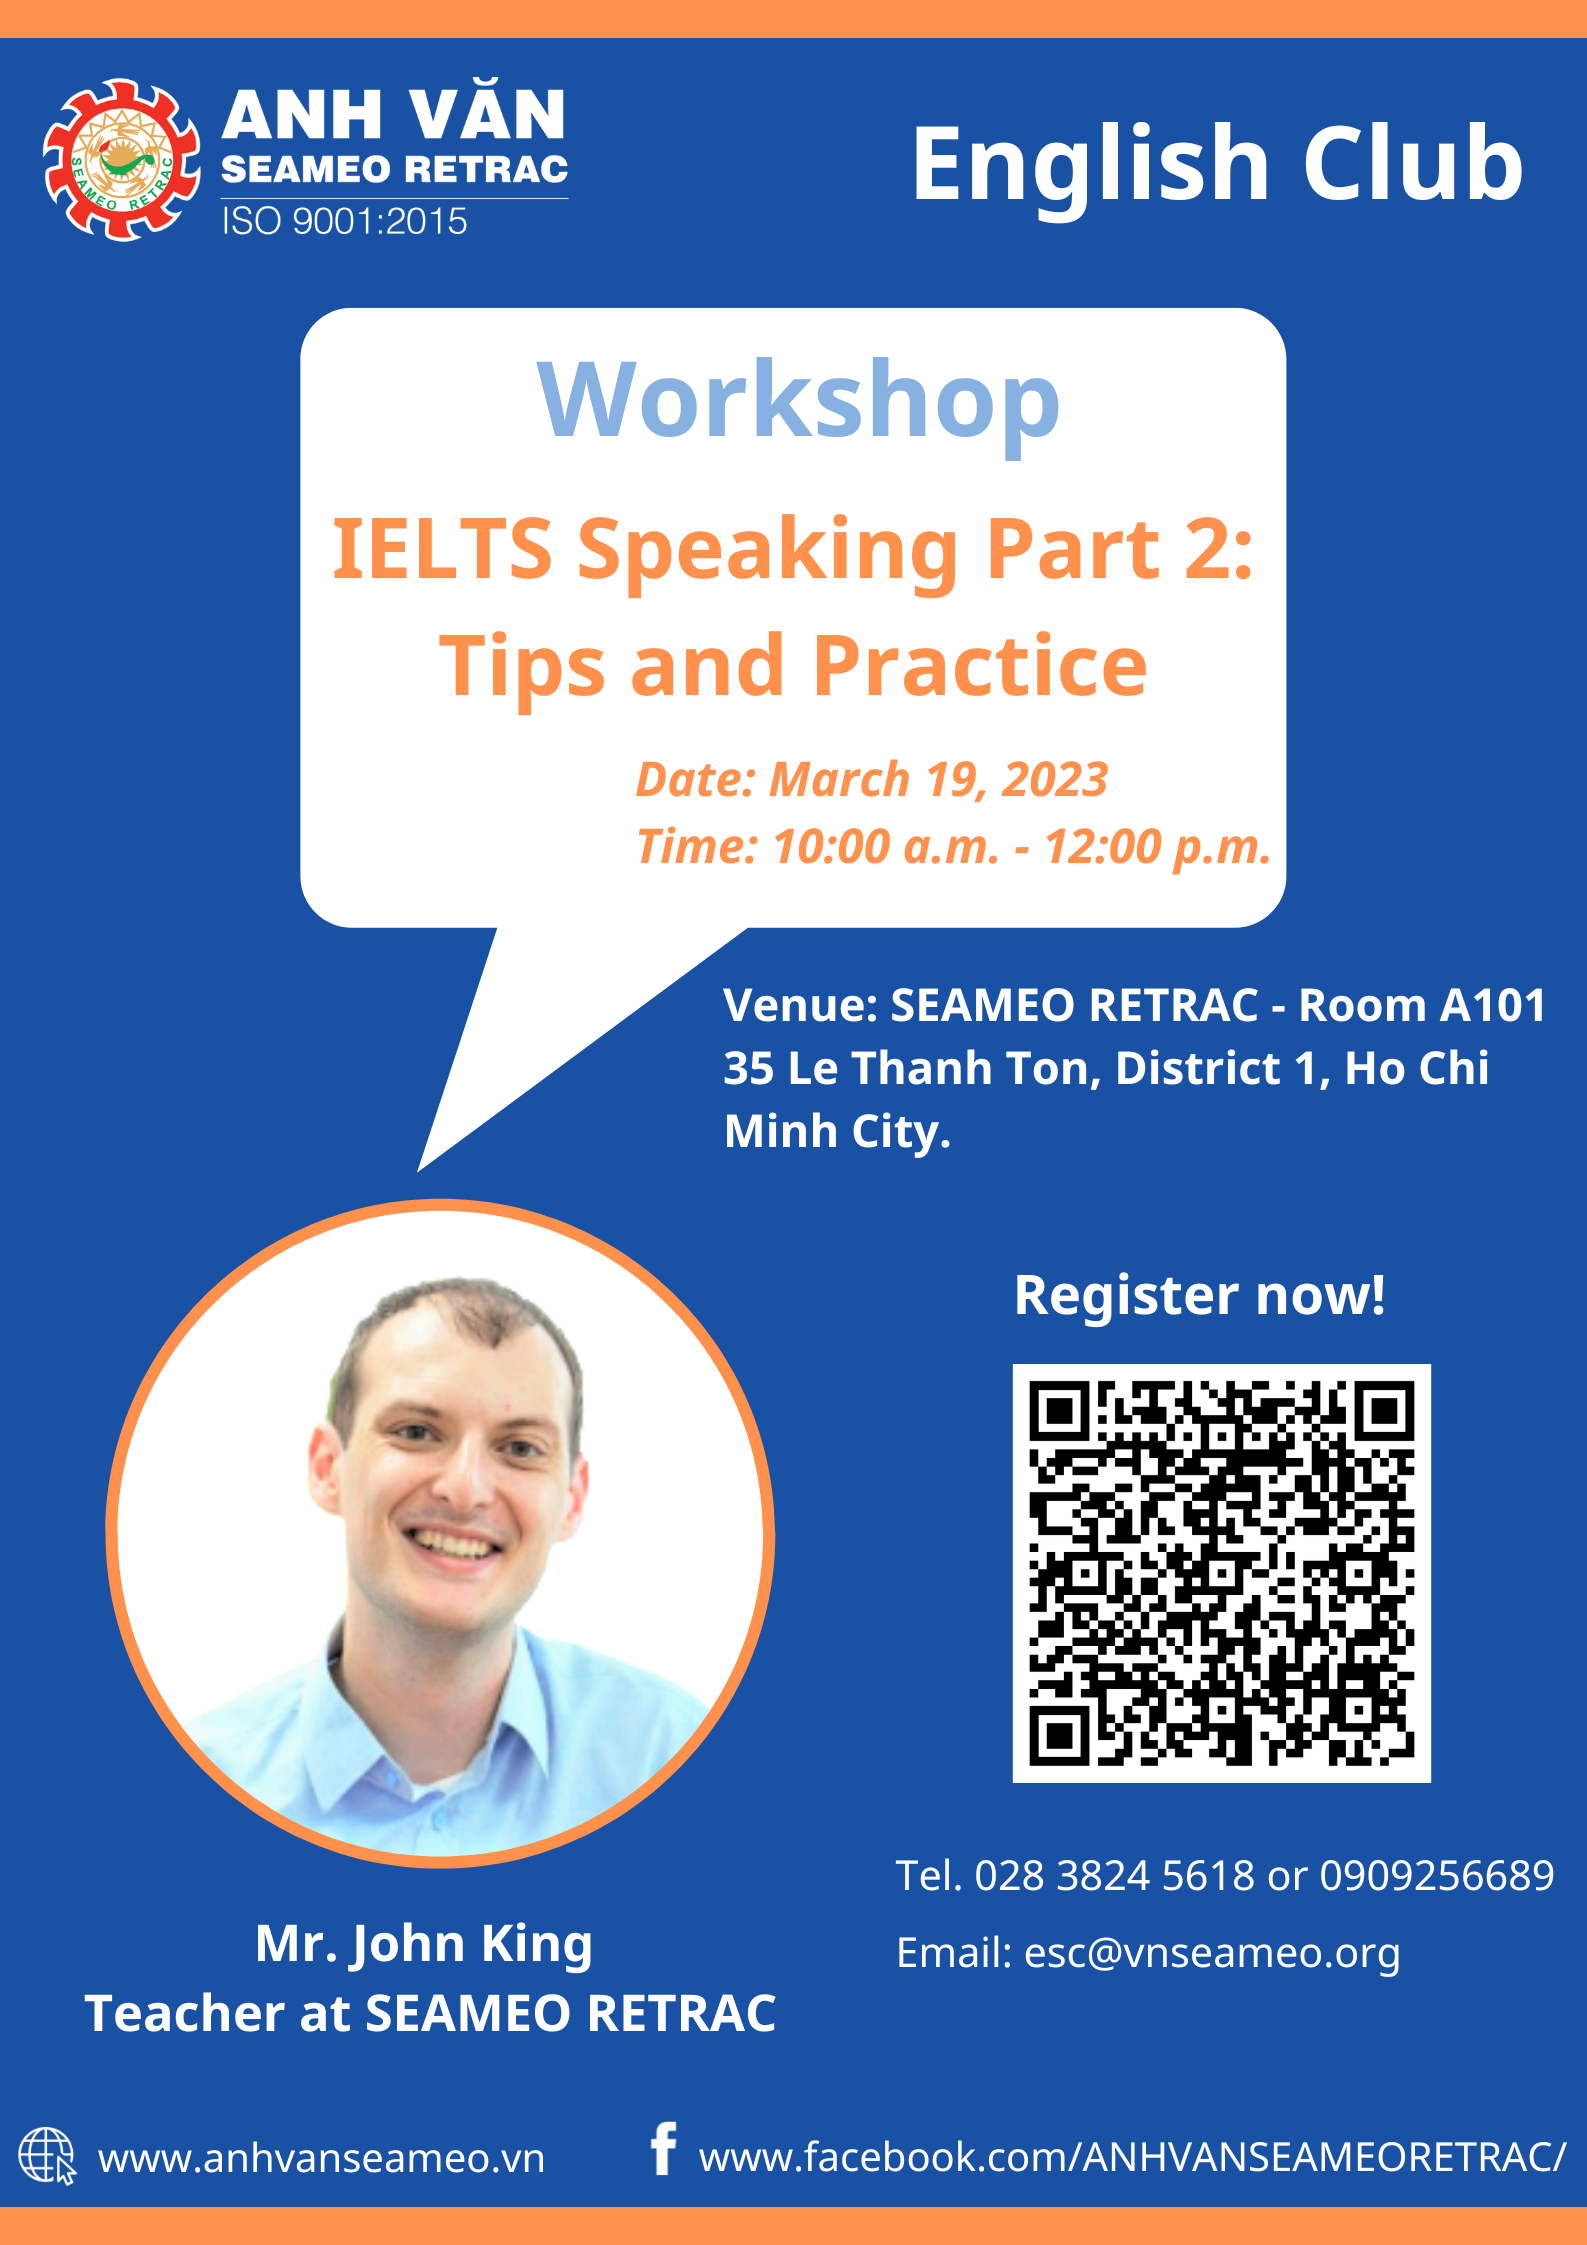 Workshop titled “IELTS Speaking Part 2: Tips and Practice”